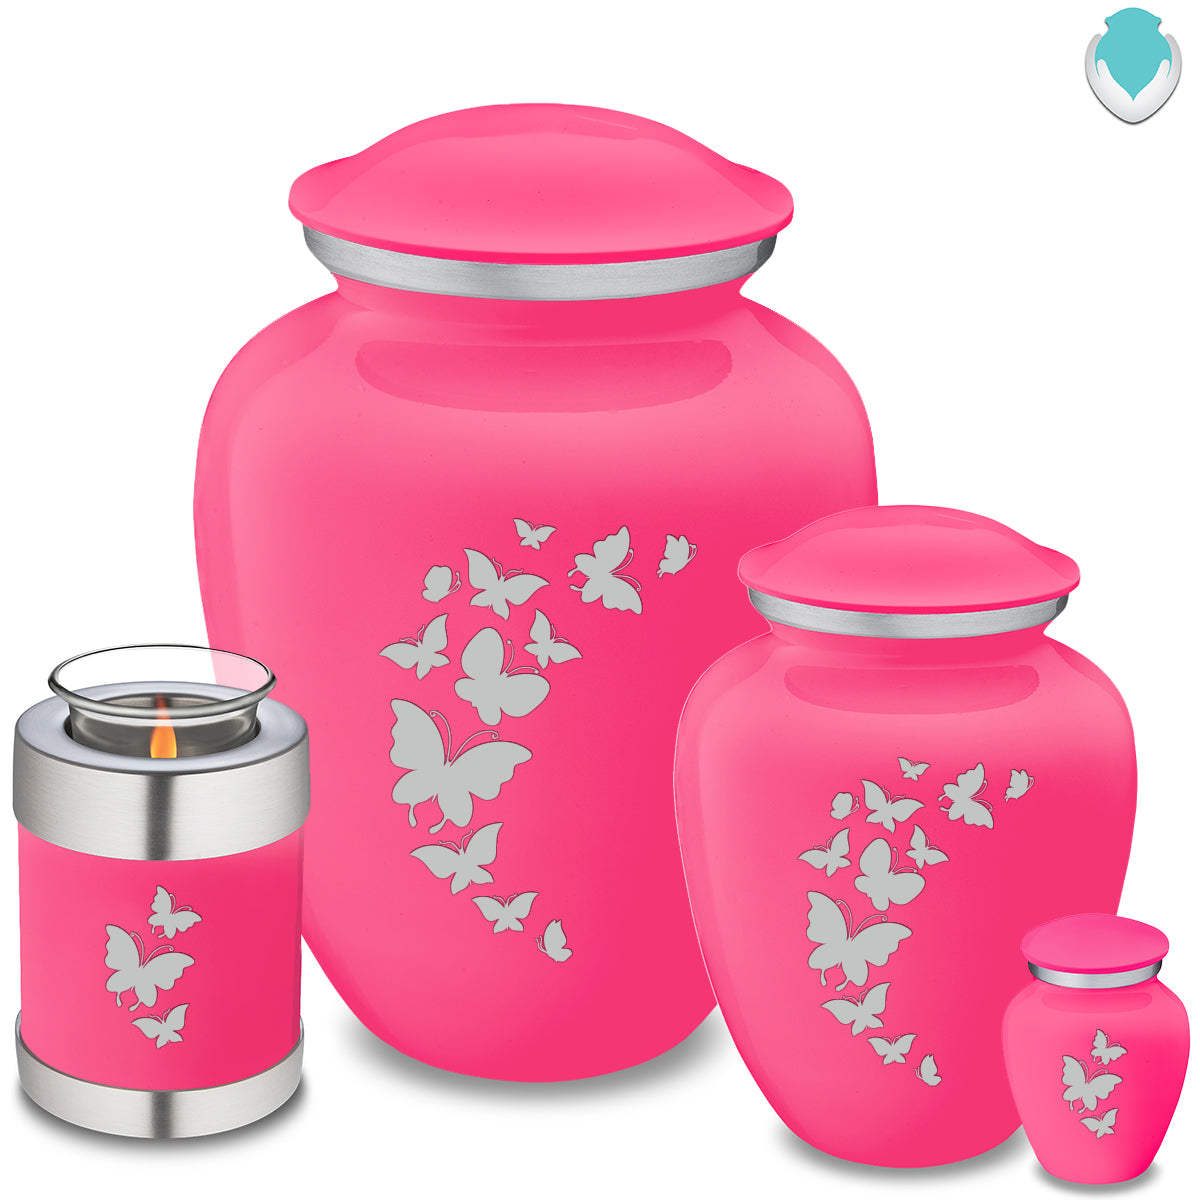 Candle Holder Embrace Bright Pink Butterfly Cremation Urn